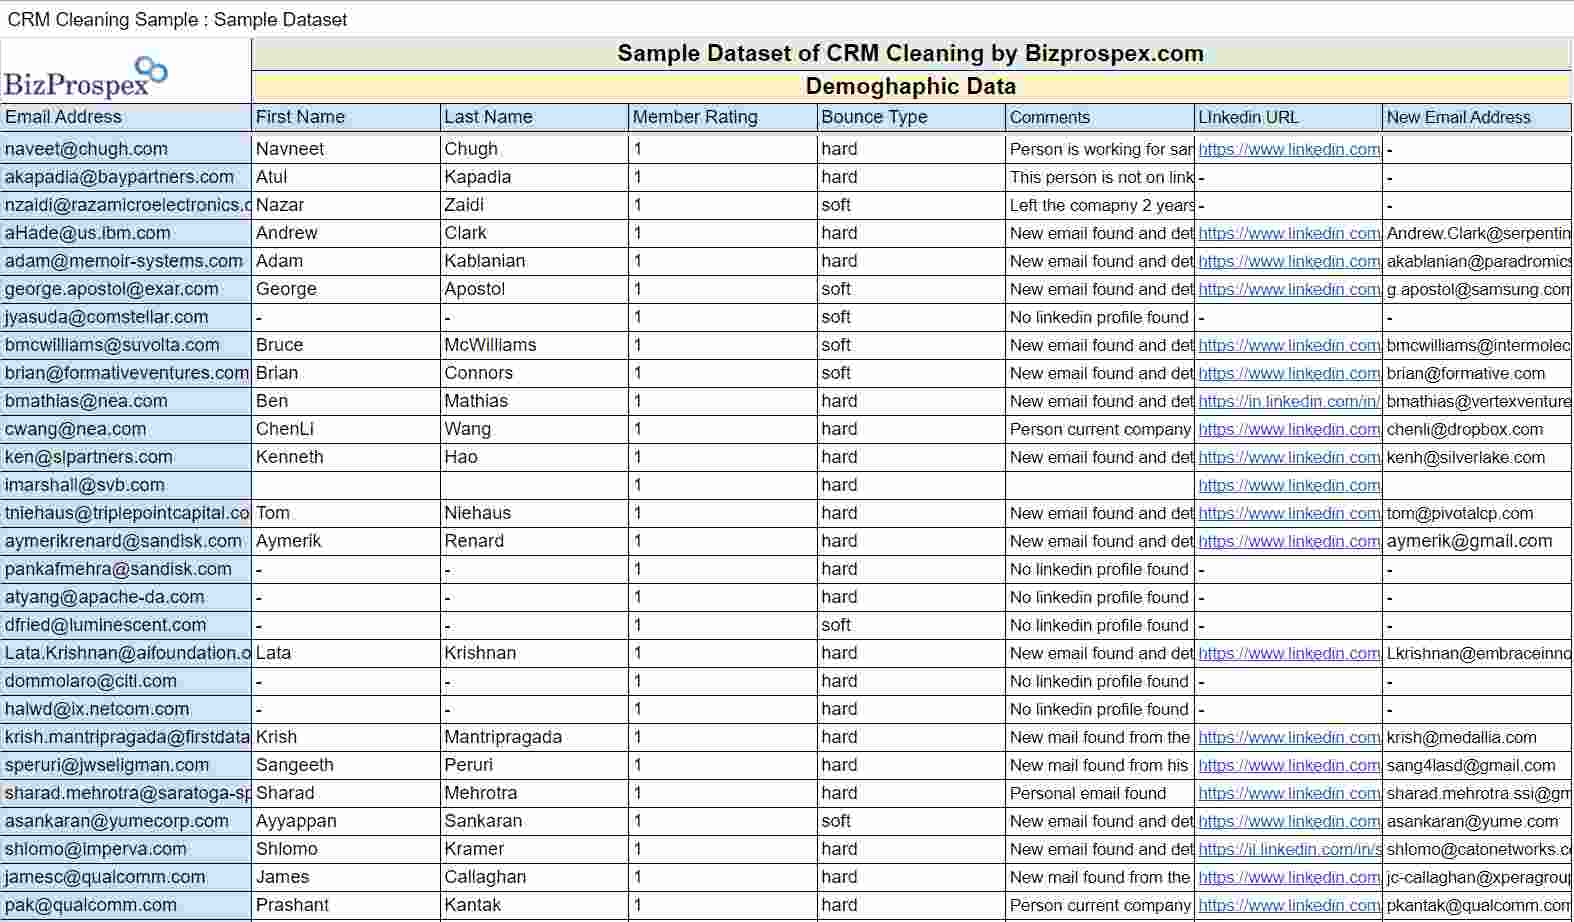 Sample-Dataset-of-CRM-Cleaning